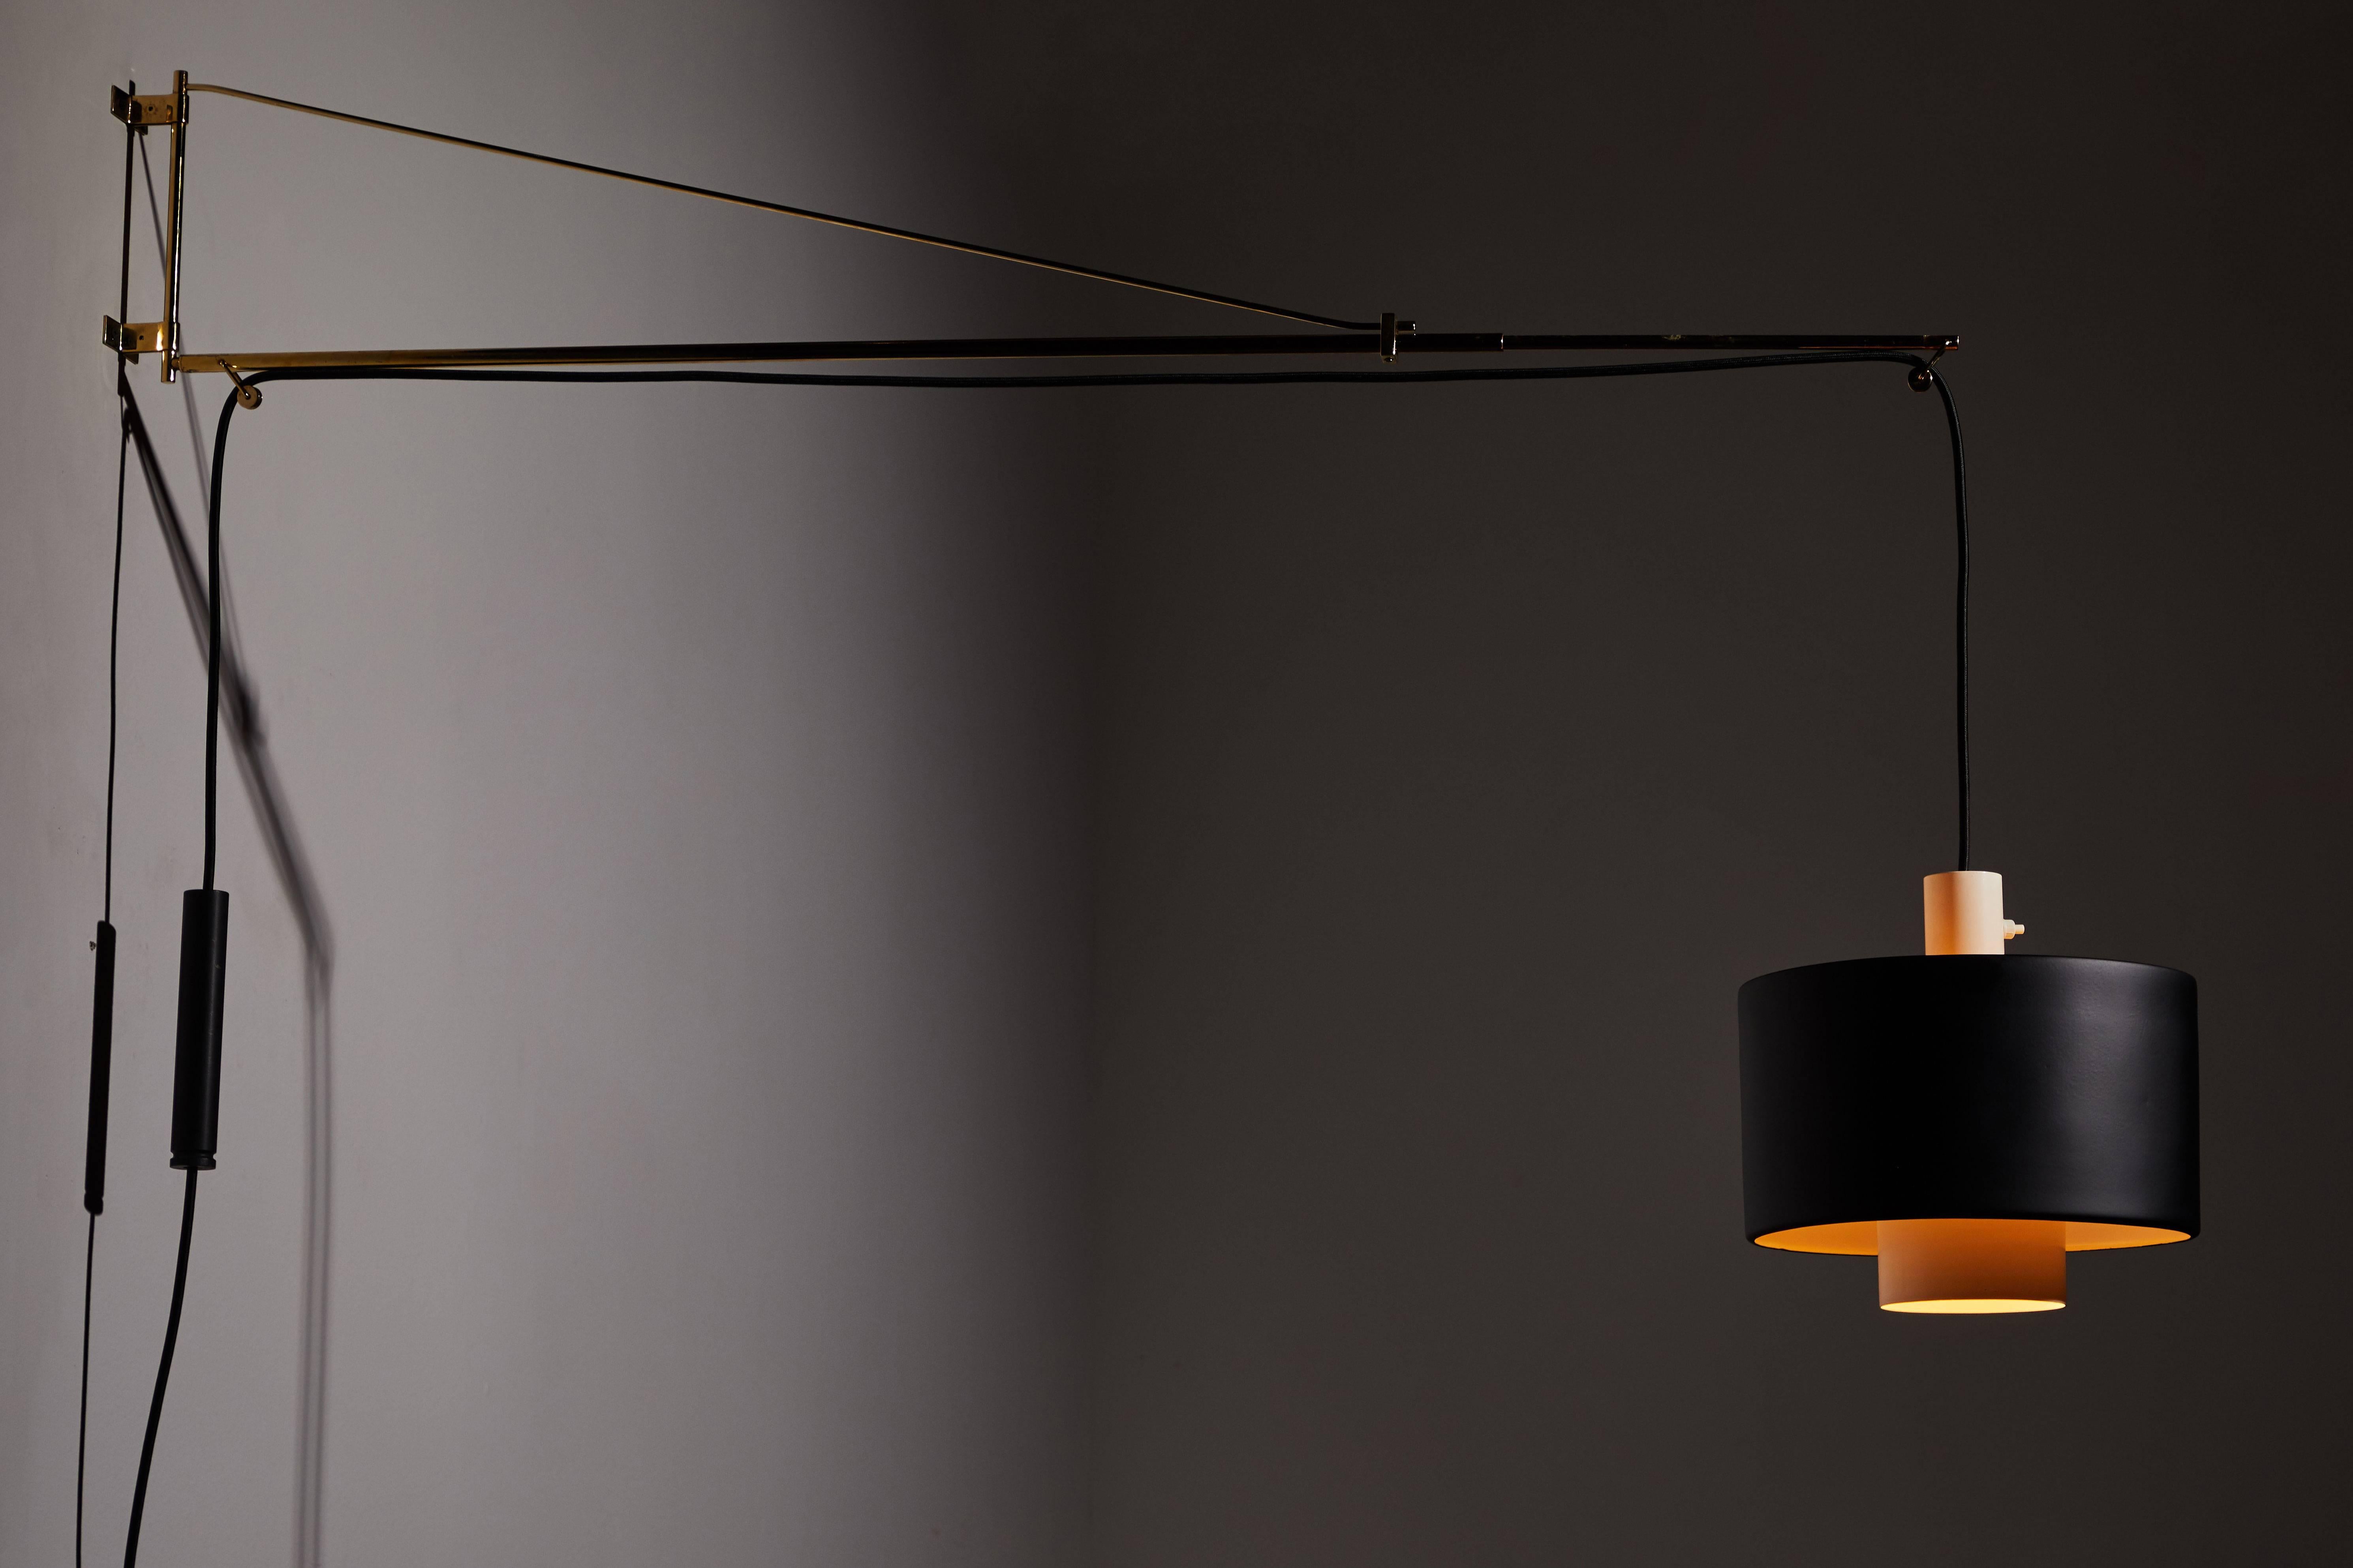 Model 2061 wall light by Gaetano Sciolari for Stilnovo, circa 1950s. Restored, powder coated metal shade and brass pivoting arms. Pulley system adjust the height of the fixture. Wired for US junction boxes. Takes one E27 100w maximum bulb. Height